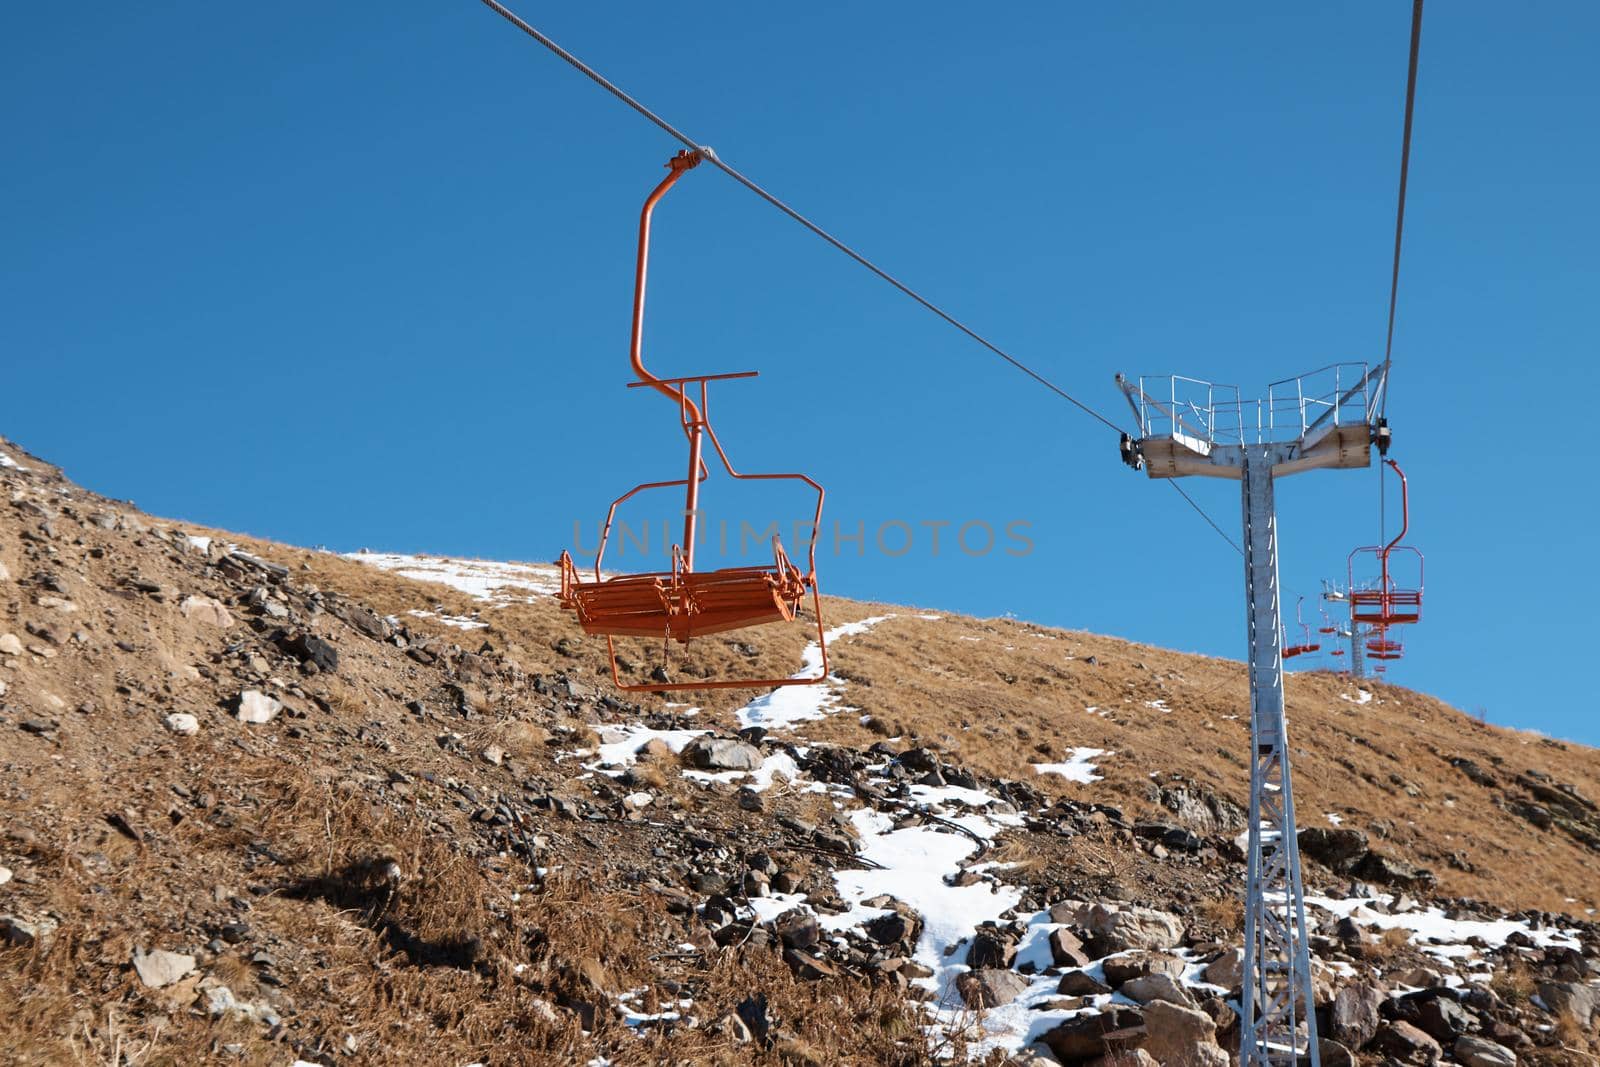 High quality photo about Dombay, alps, chairlift, ski lift, first snow in the mountains, sun and good weather, winter ski season